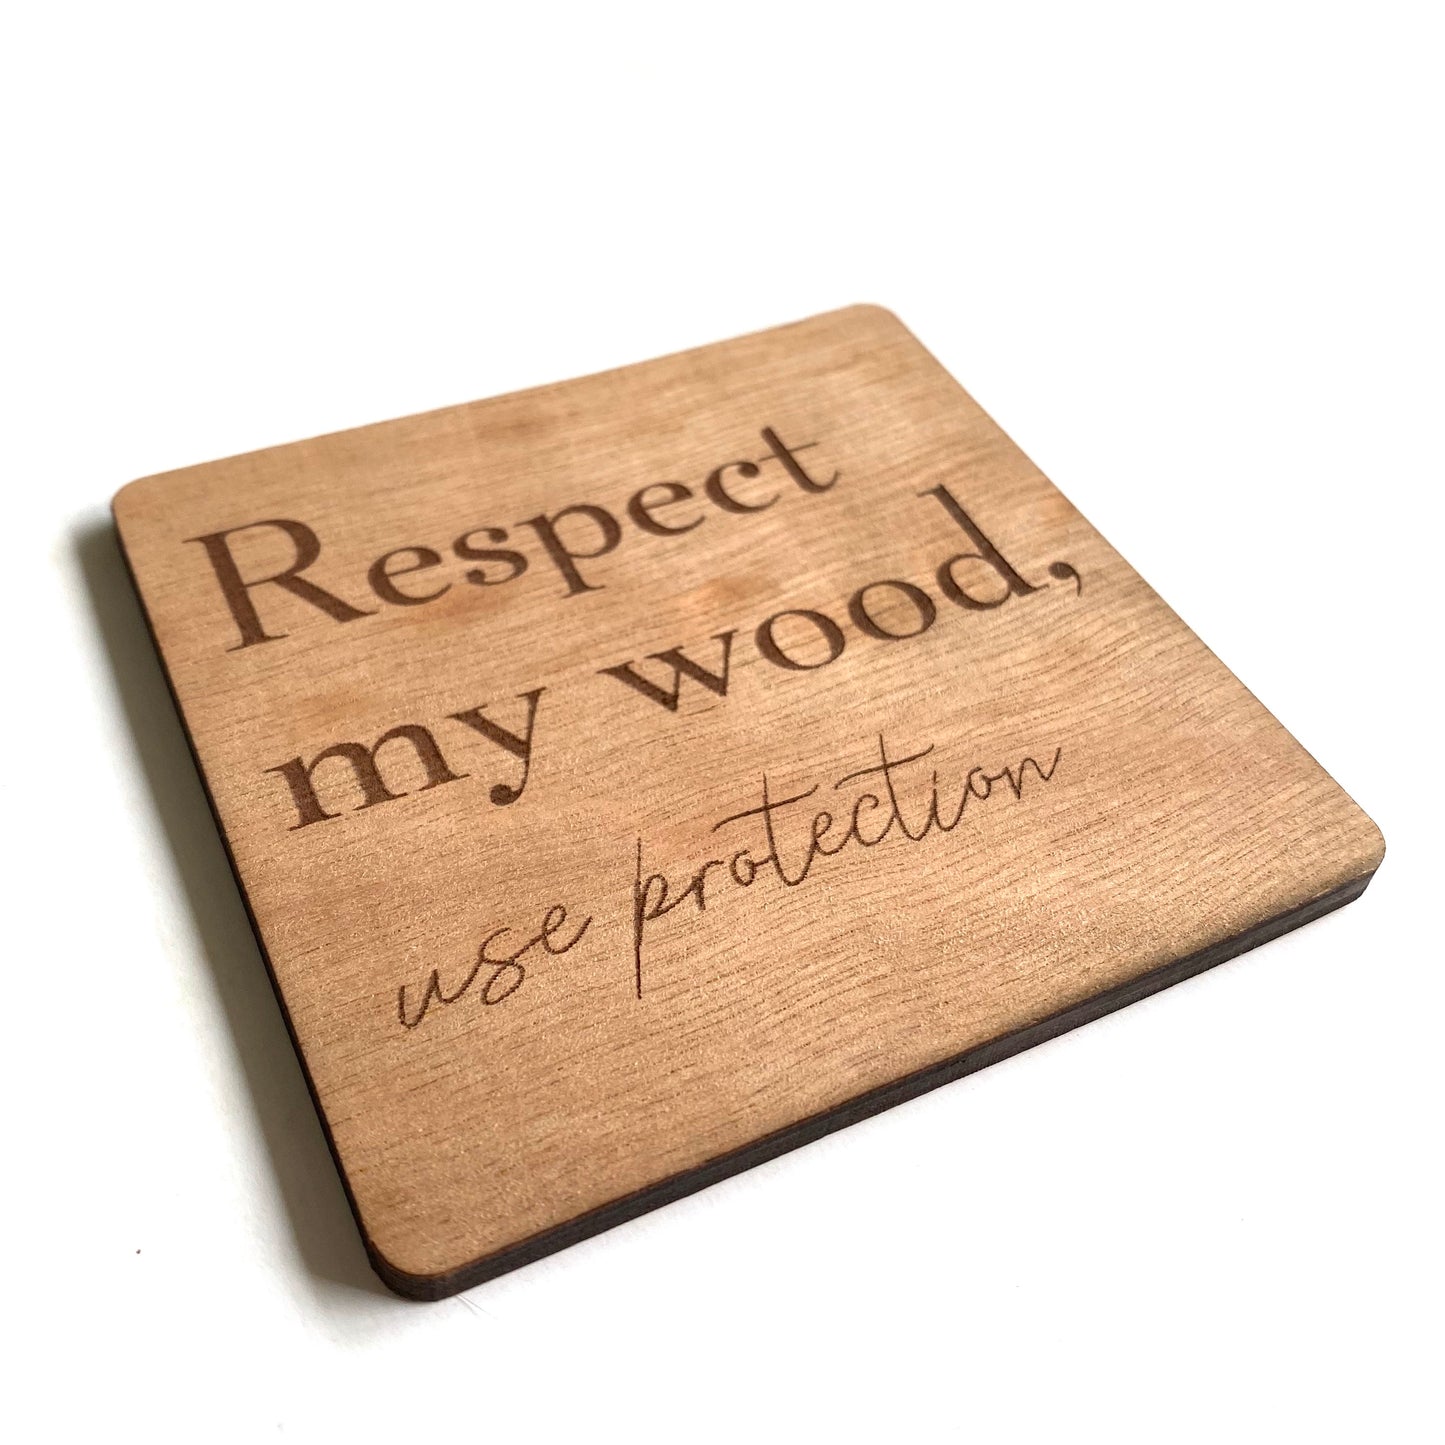 Respect my wood, use a coaster - Younique Collective